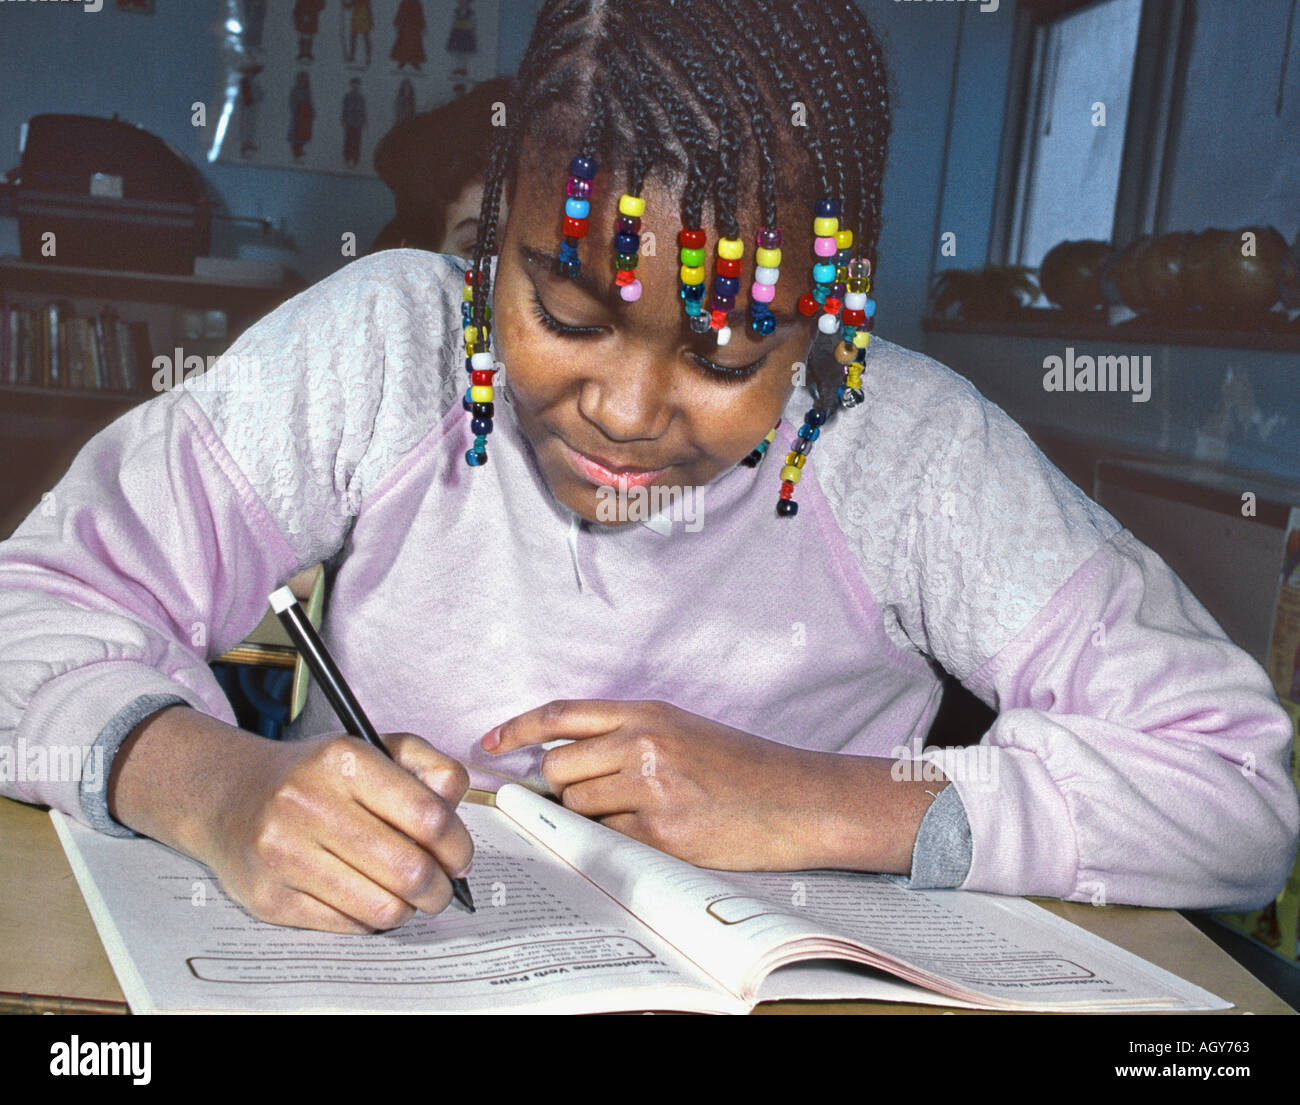 Black female middle school student works at desk with workbook Stock Photo